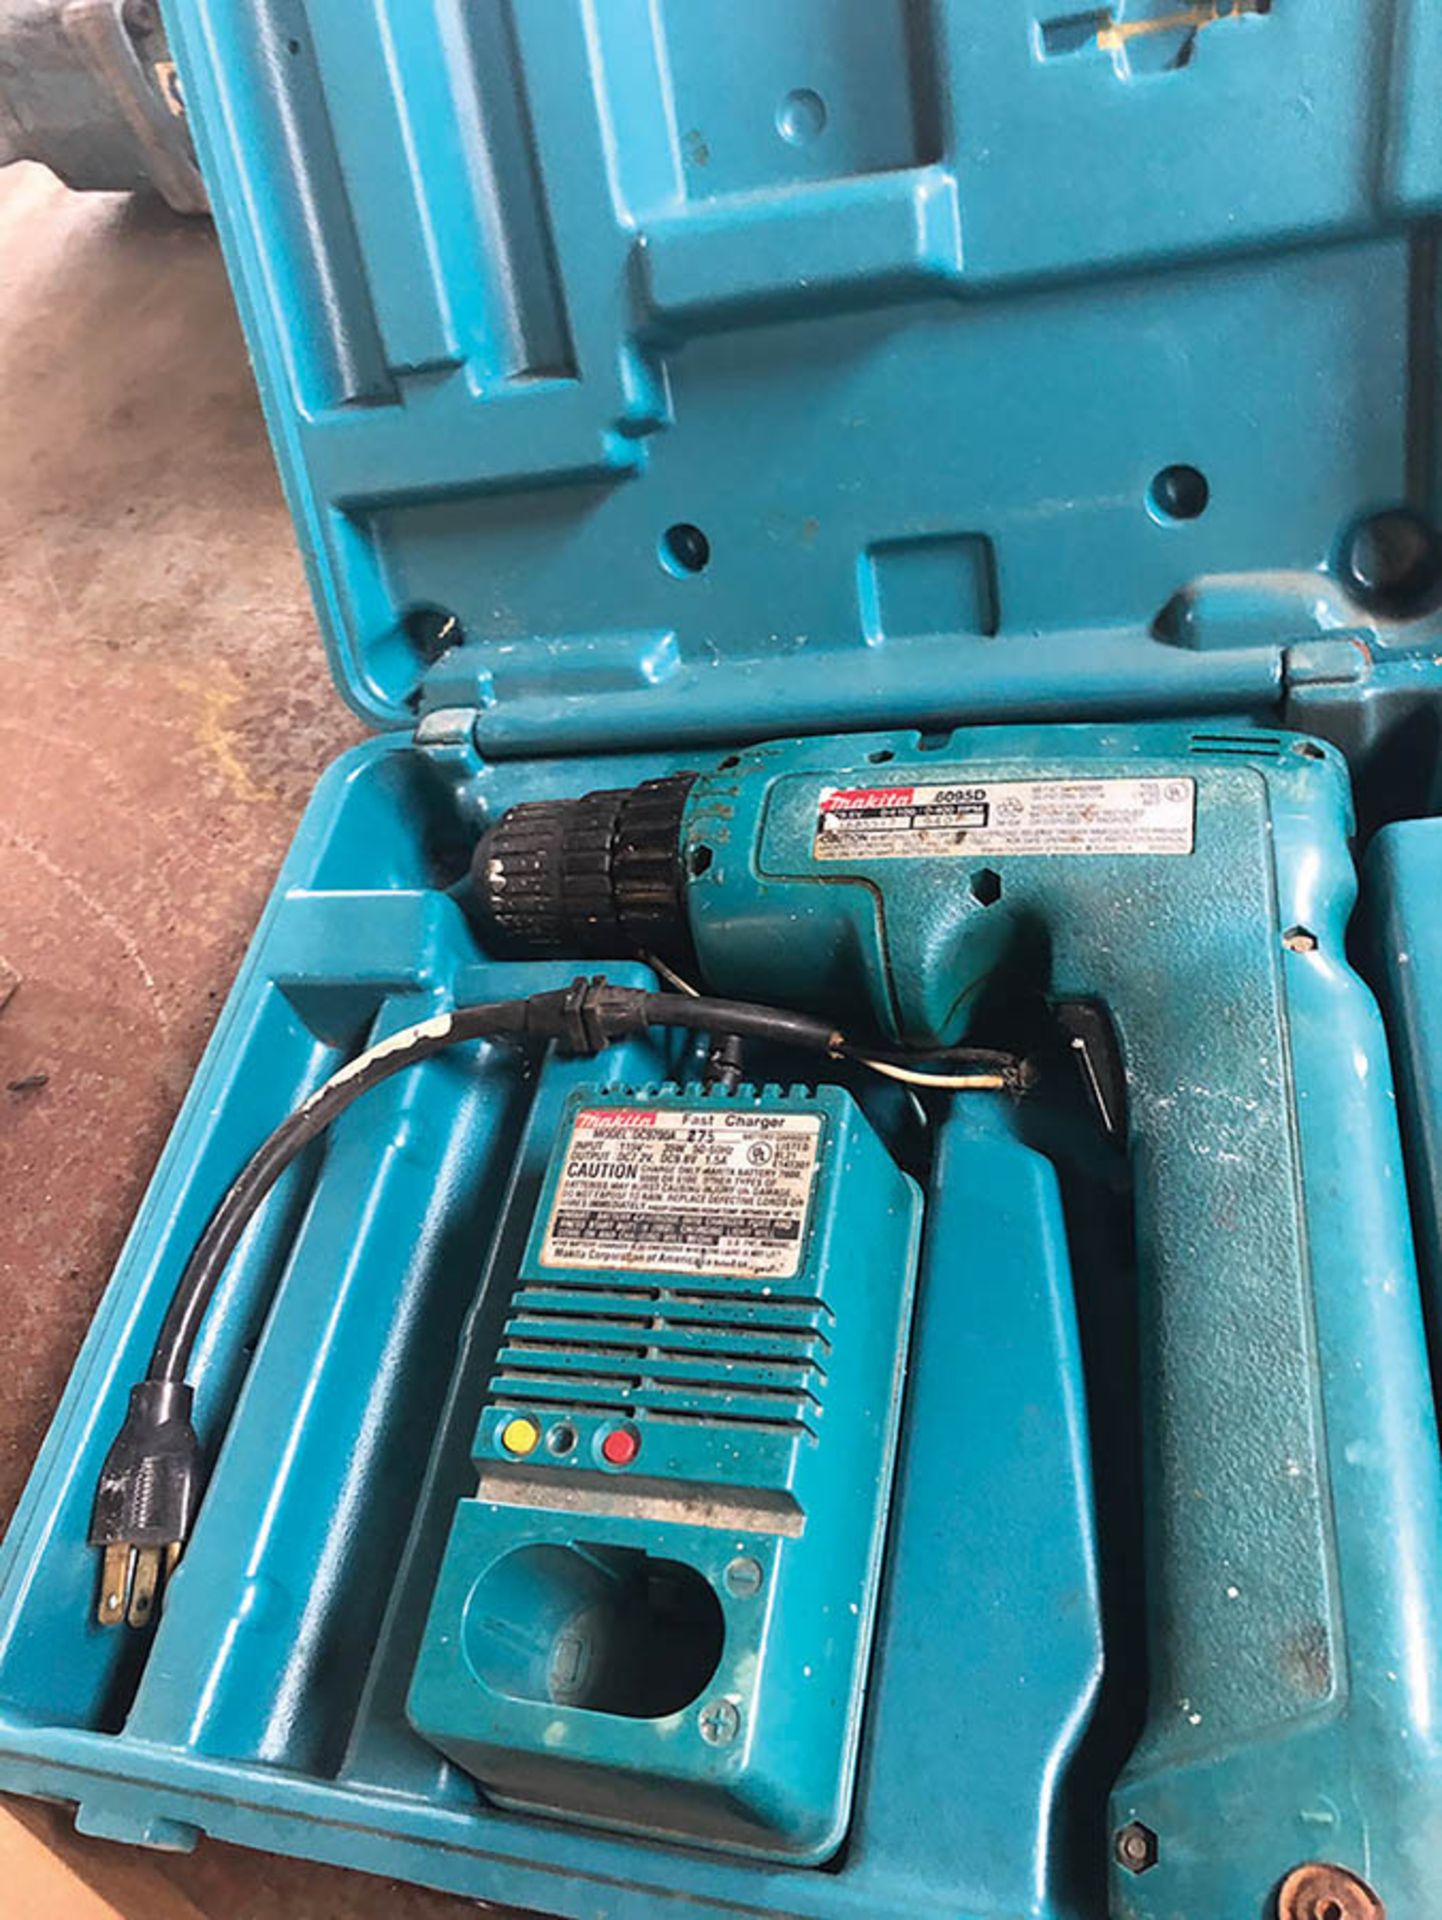 MAKITA CORDLESS DRILL 6095D, S/N 1685517, W/ CHARGER AND 9.5V BATTERY